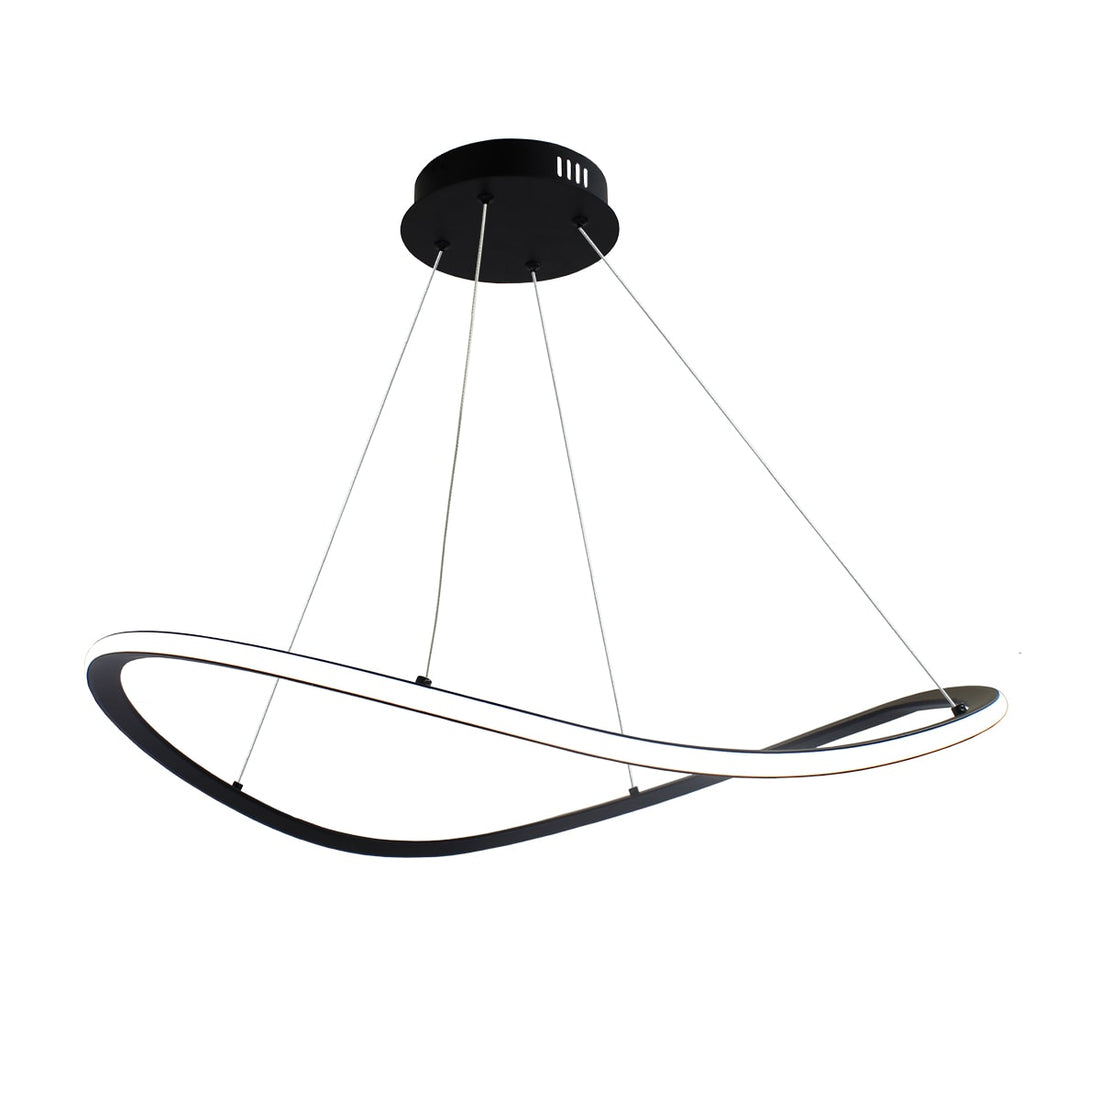 RAKY ALUMINIUM CHANDELIER BLACK D70 CM LED 40W CCT DIMMABLE WITH REMOTE CONTROL - best price from Maltashopper.com BR420008312